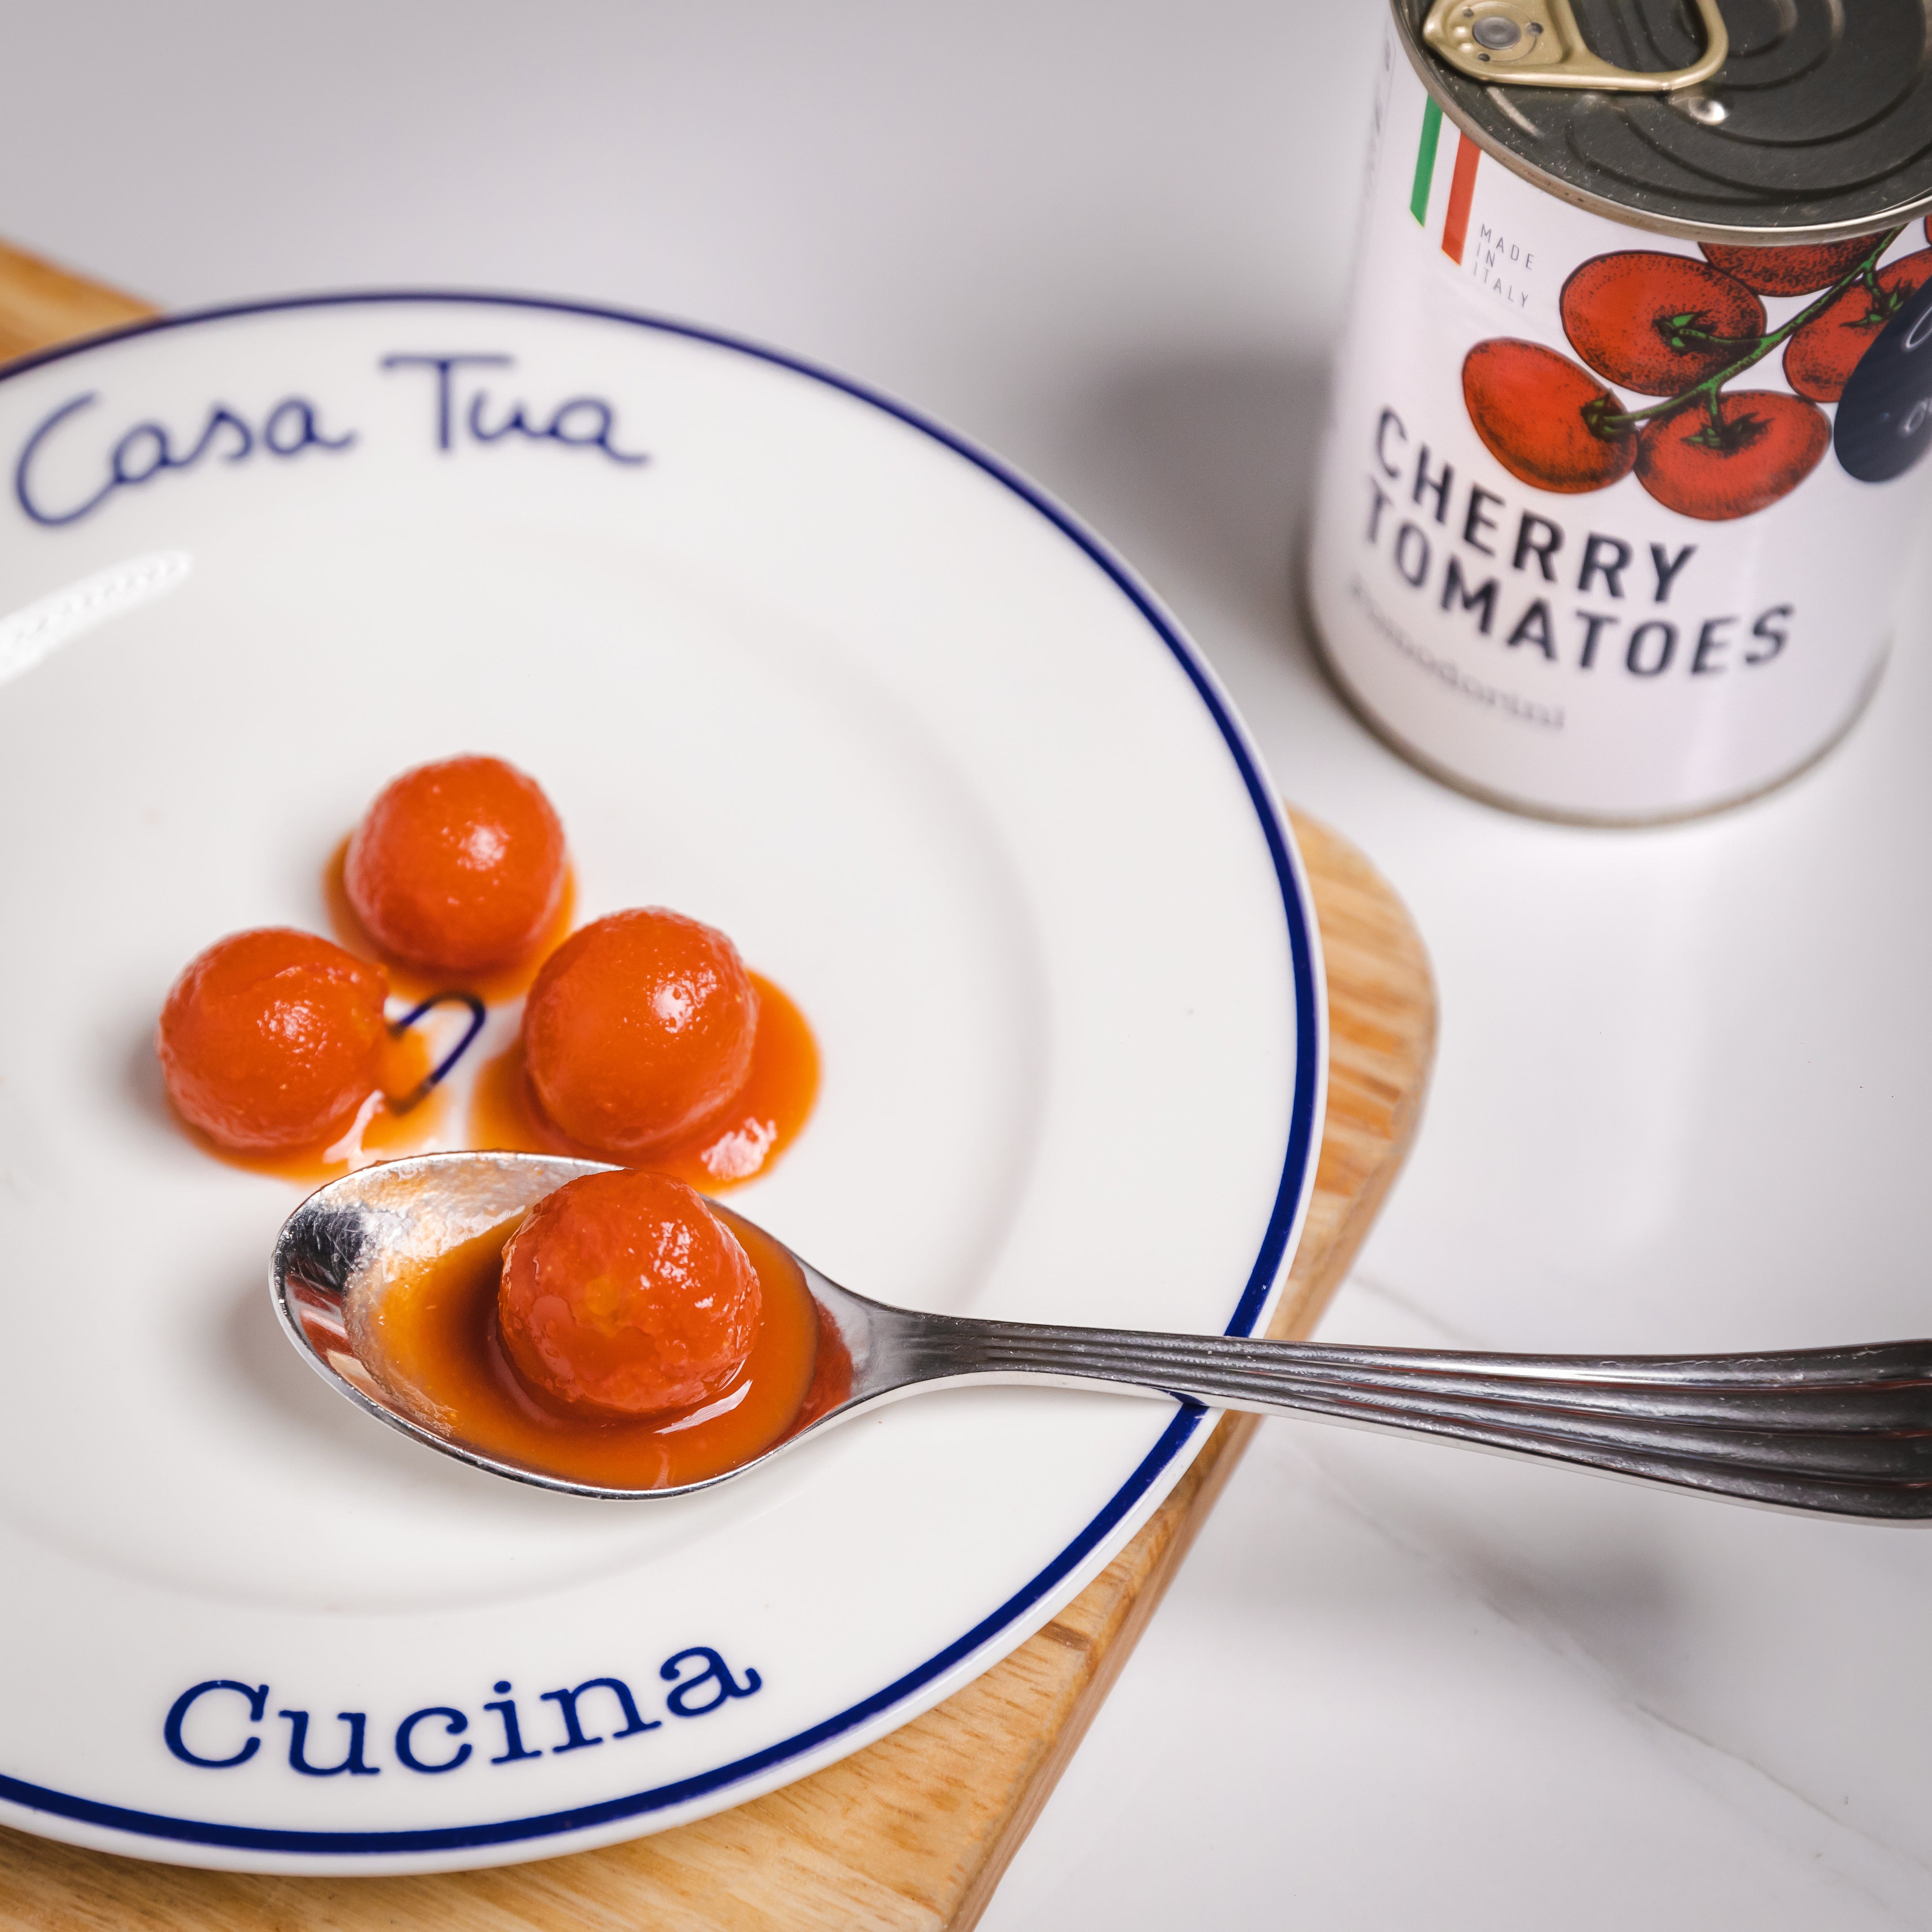 CHERRY TOMATOES FROM APULIA